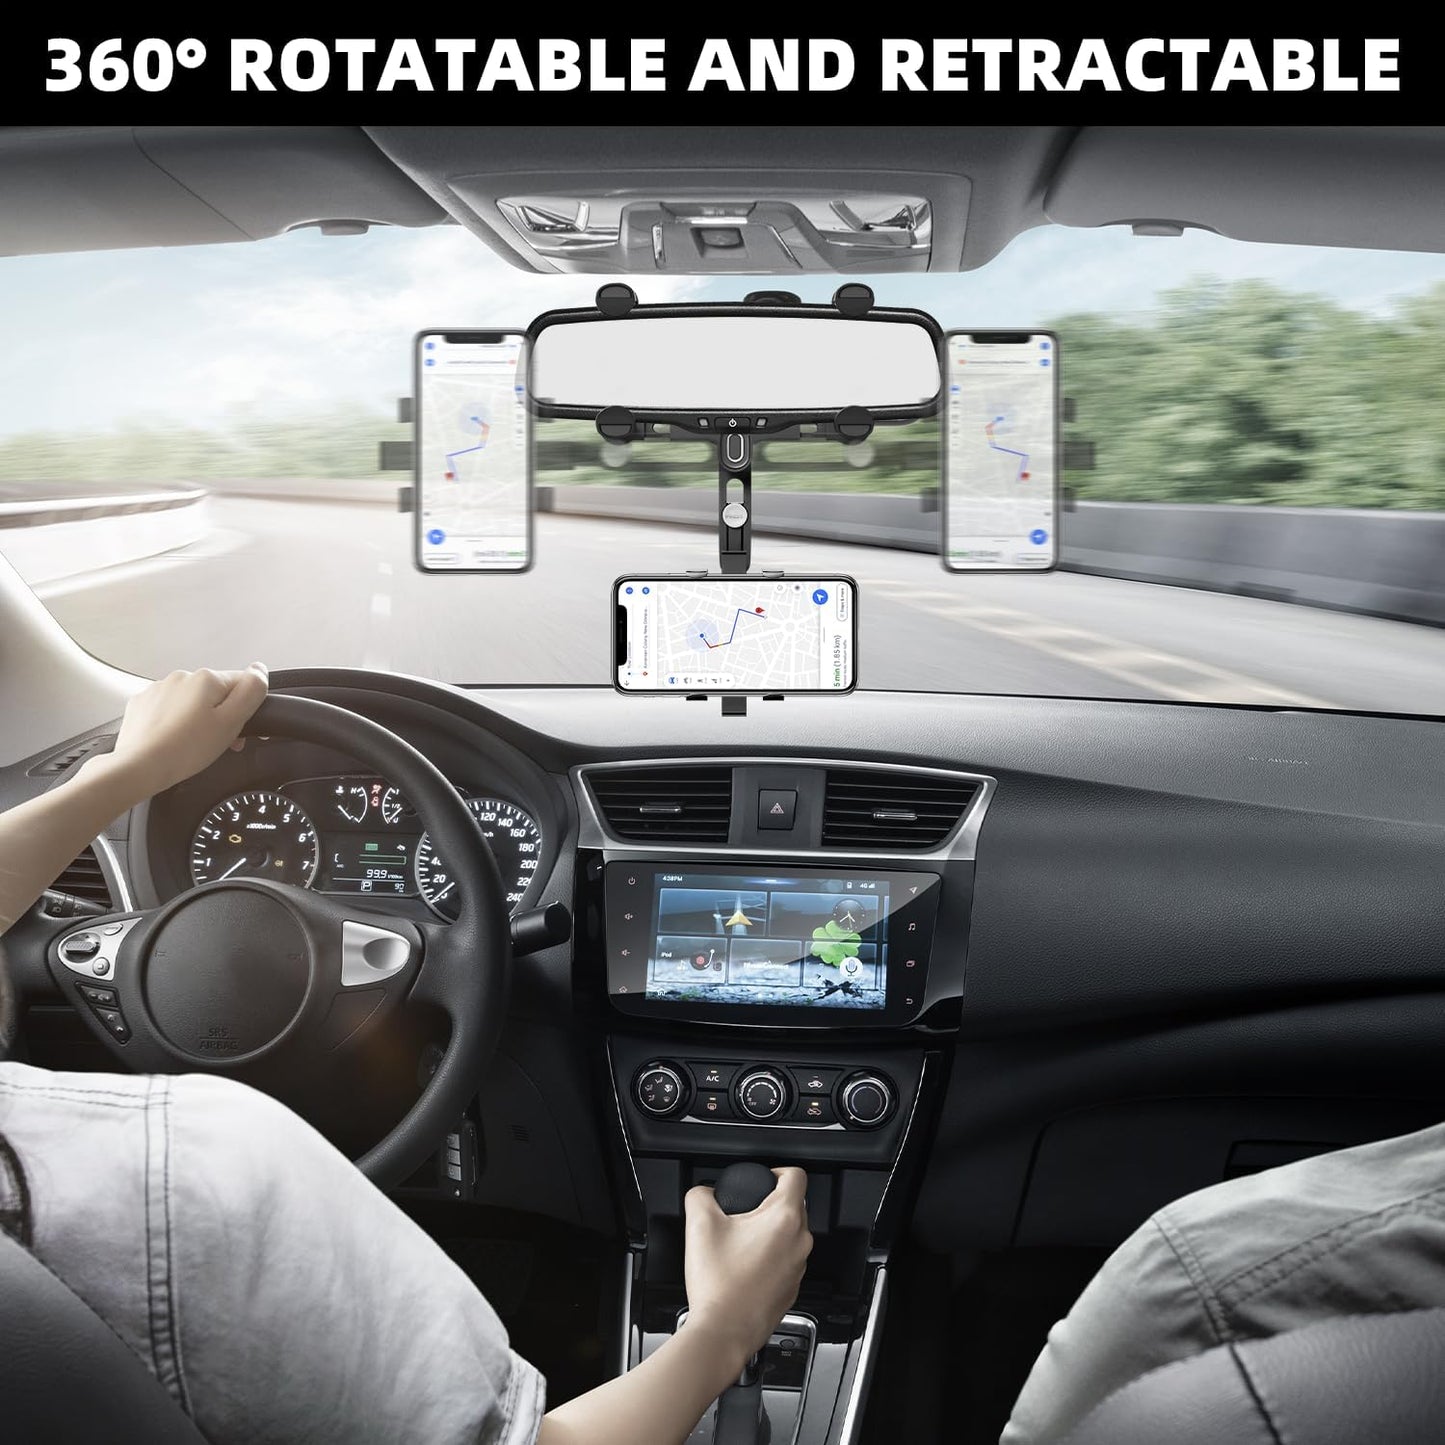 SXhyf New Rear View Mirror Phone Holder